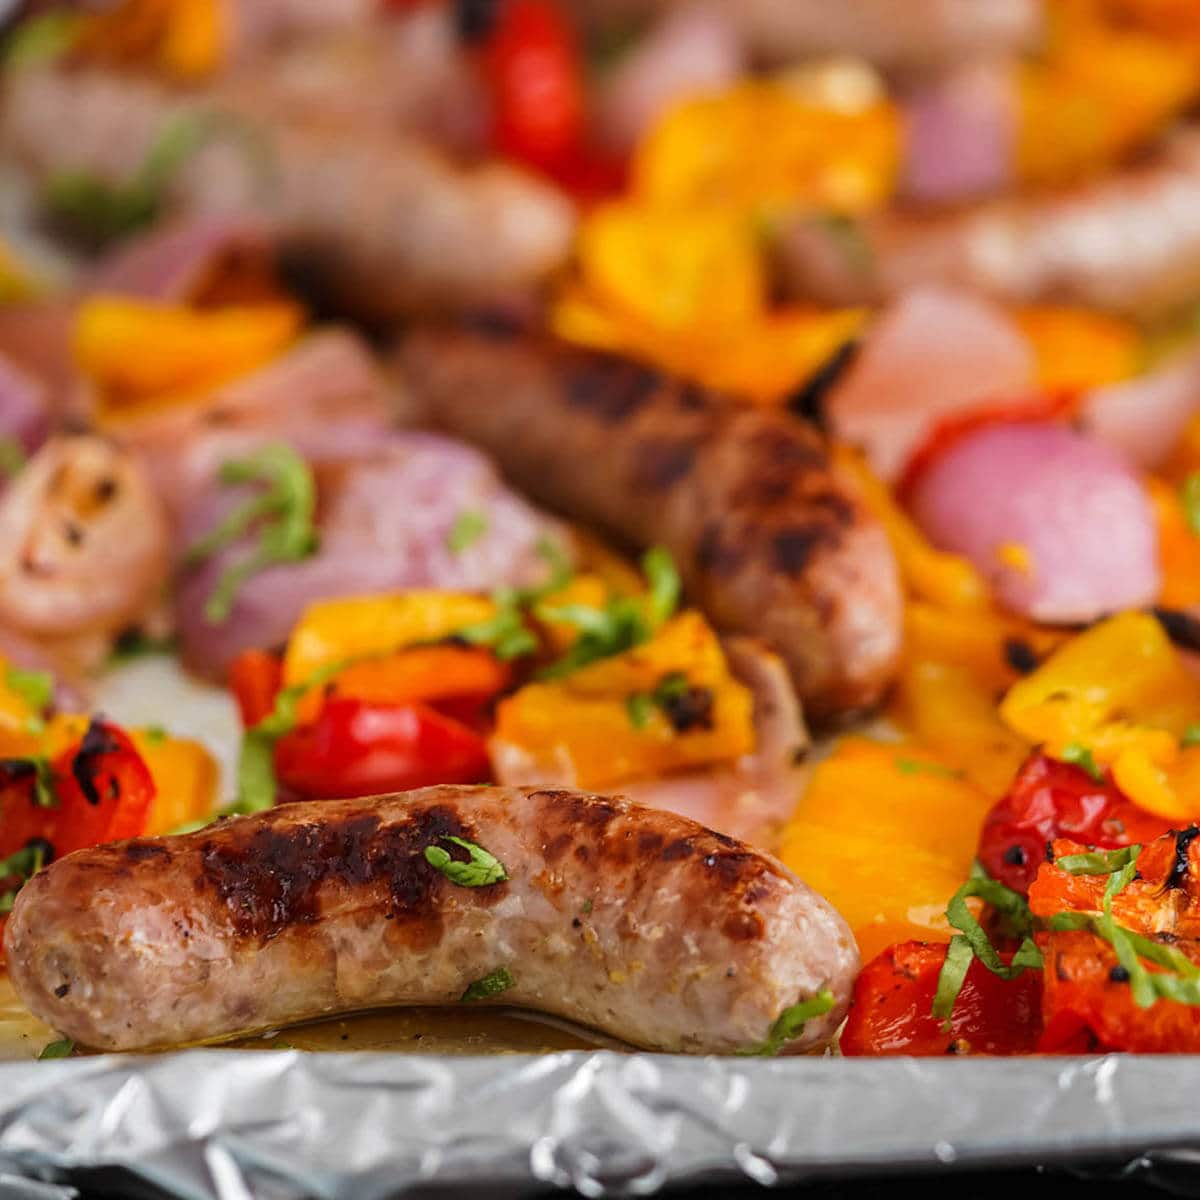 Sausage and peppers in oven recipe.